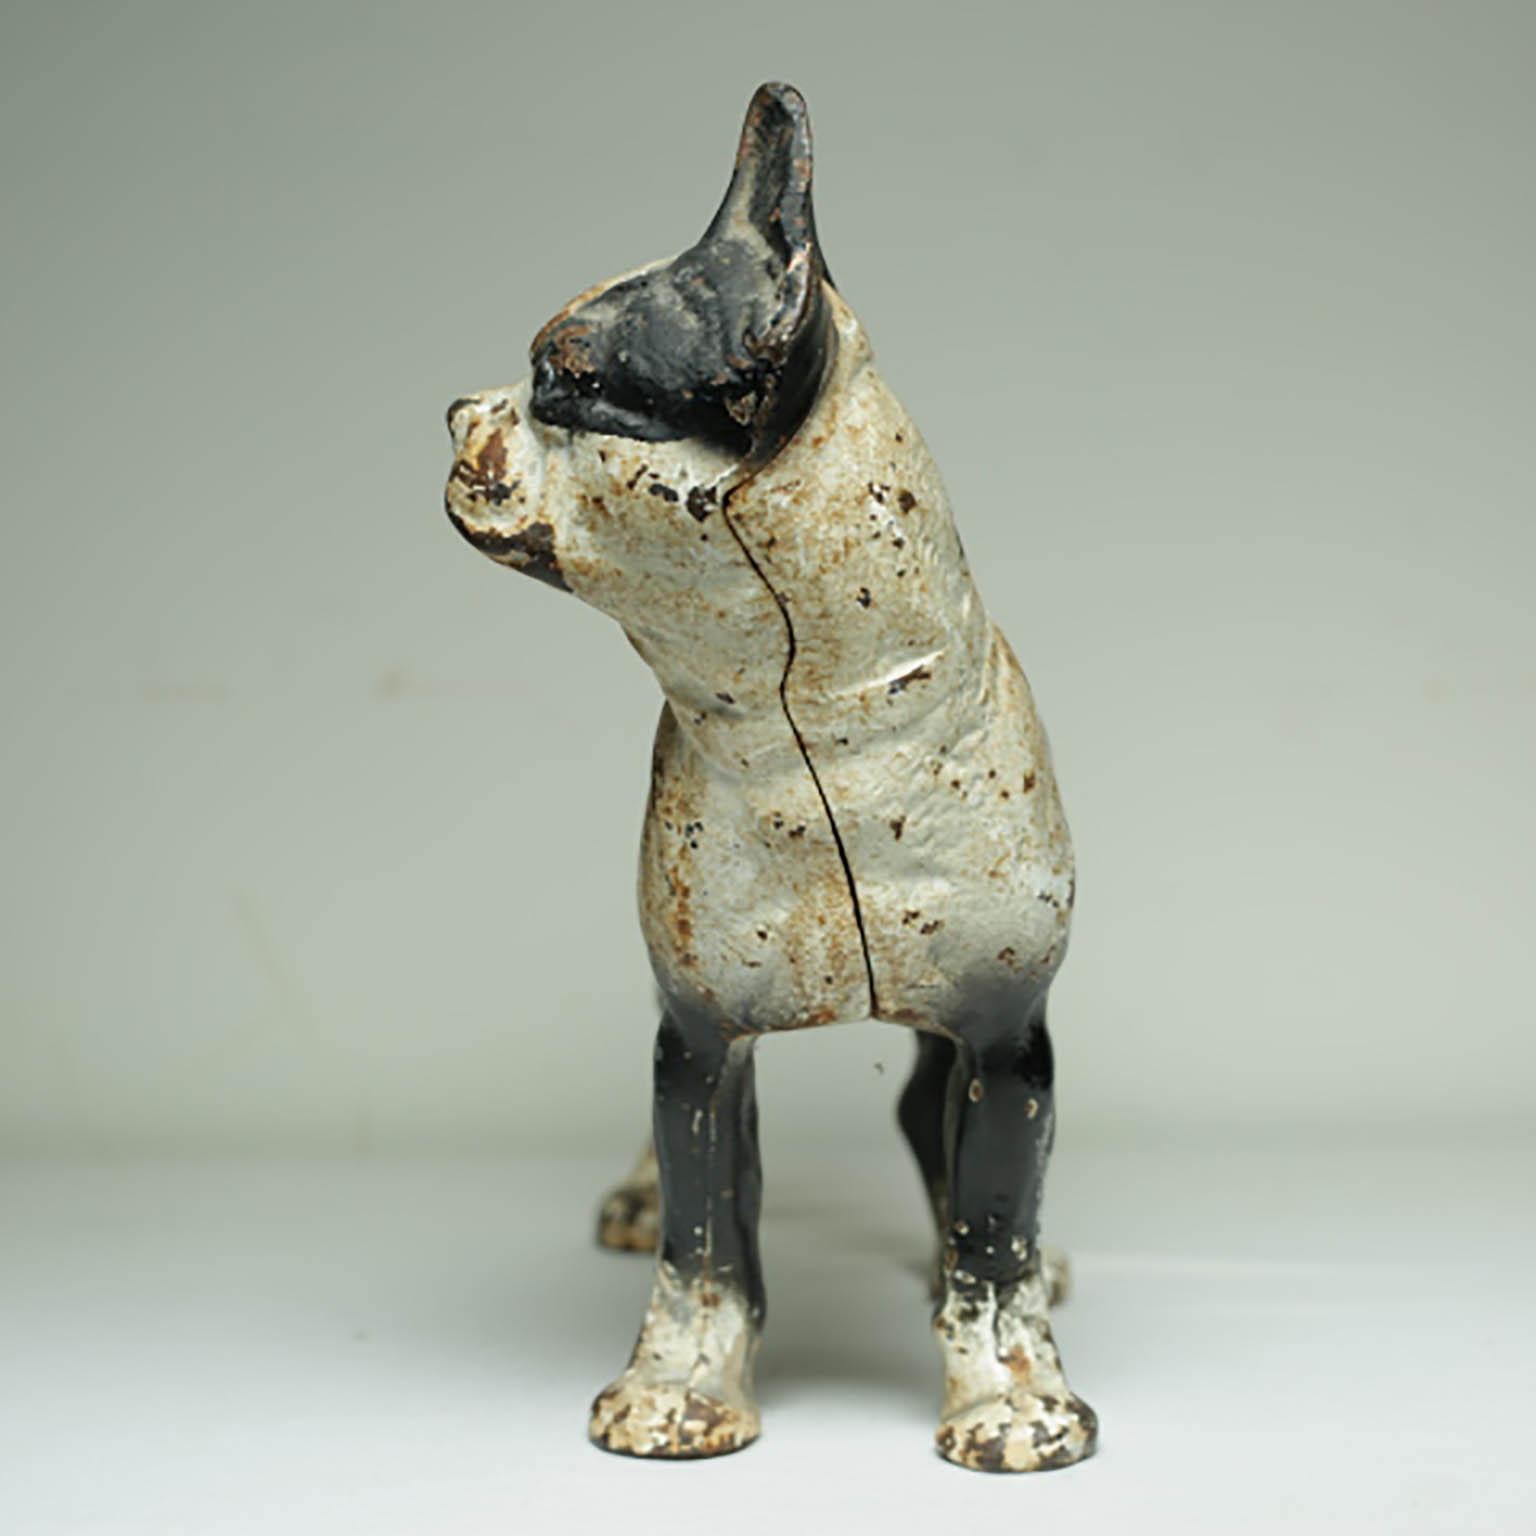 Very charming cast iron Boston Terrier doorstop. Heavy enough to prop a door open or decorate on a shelf or coffee table. Manufactured by Hubley, circa 1930s.